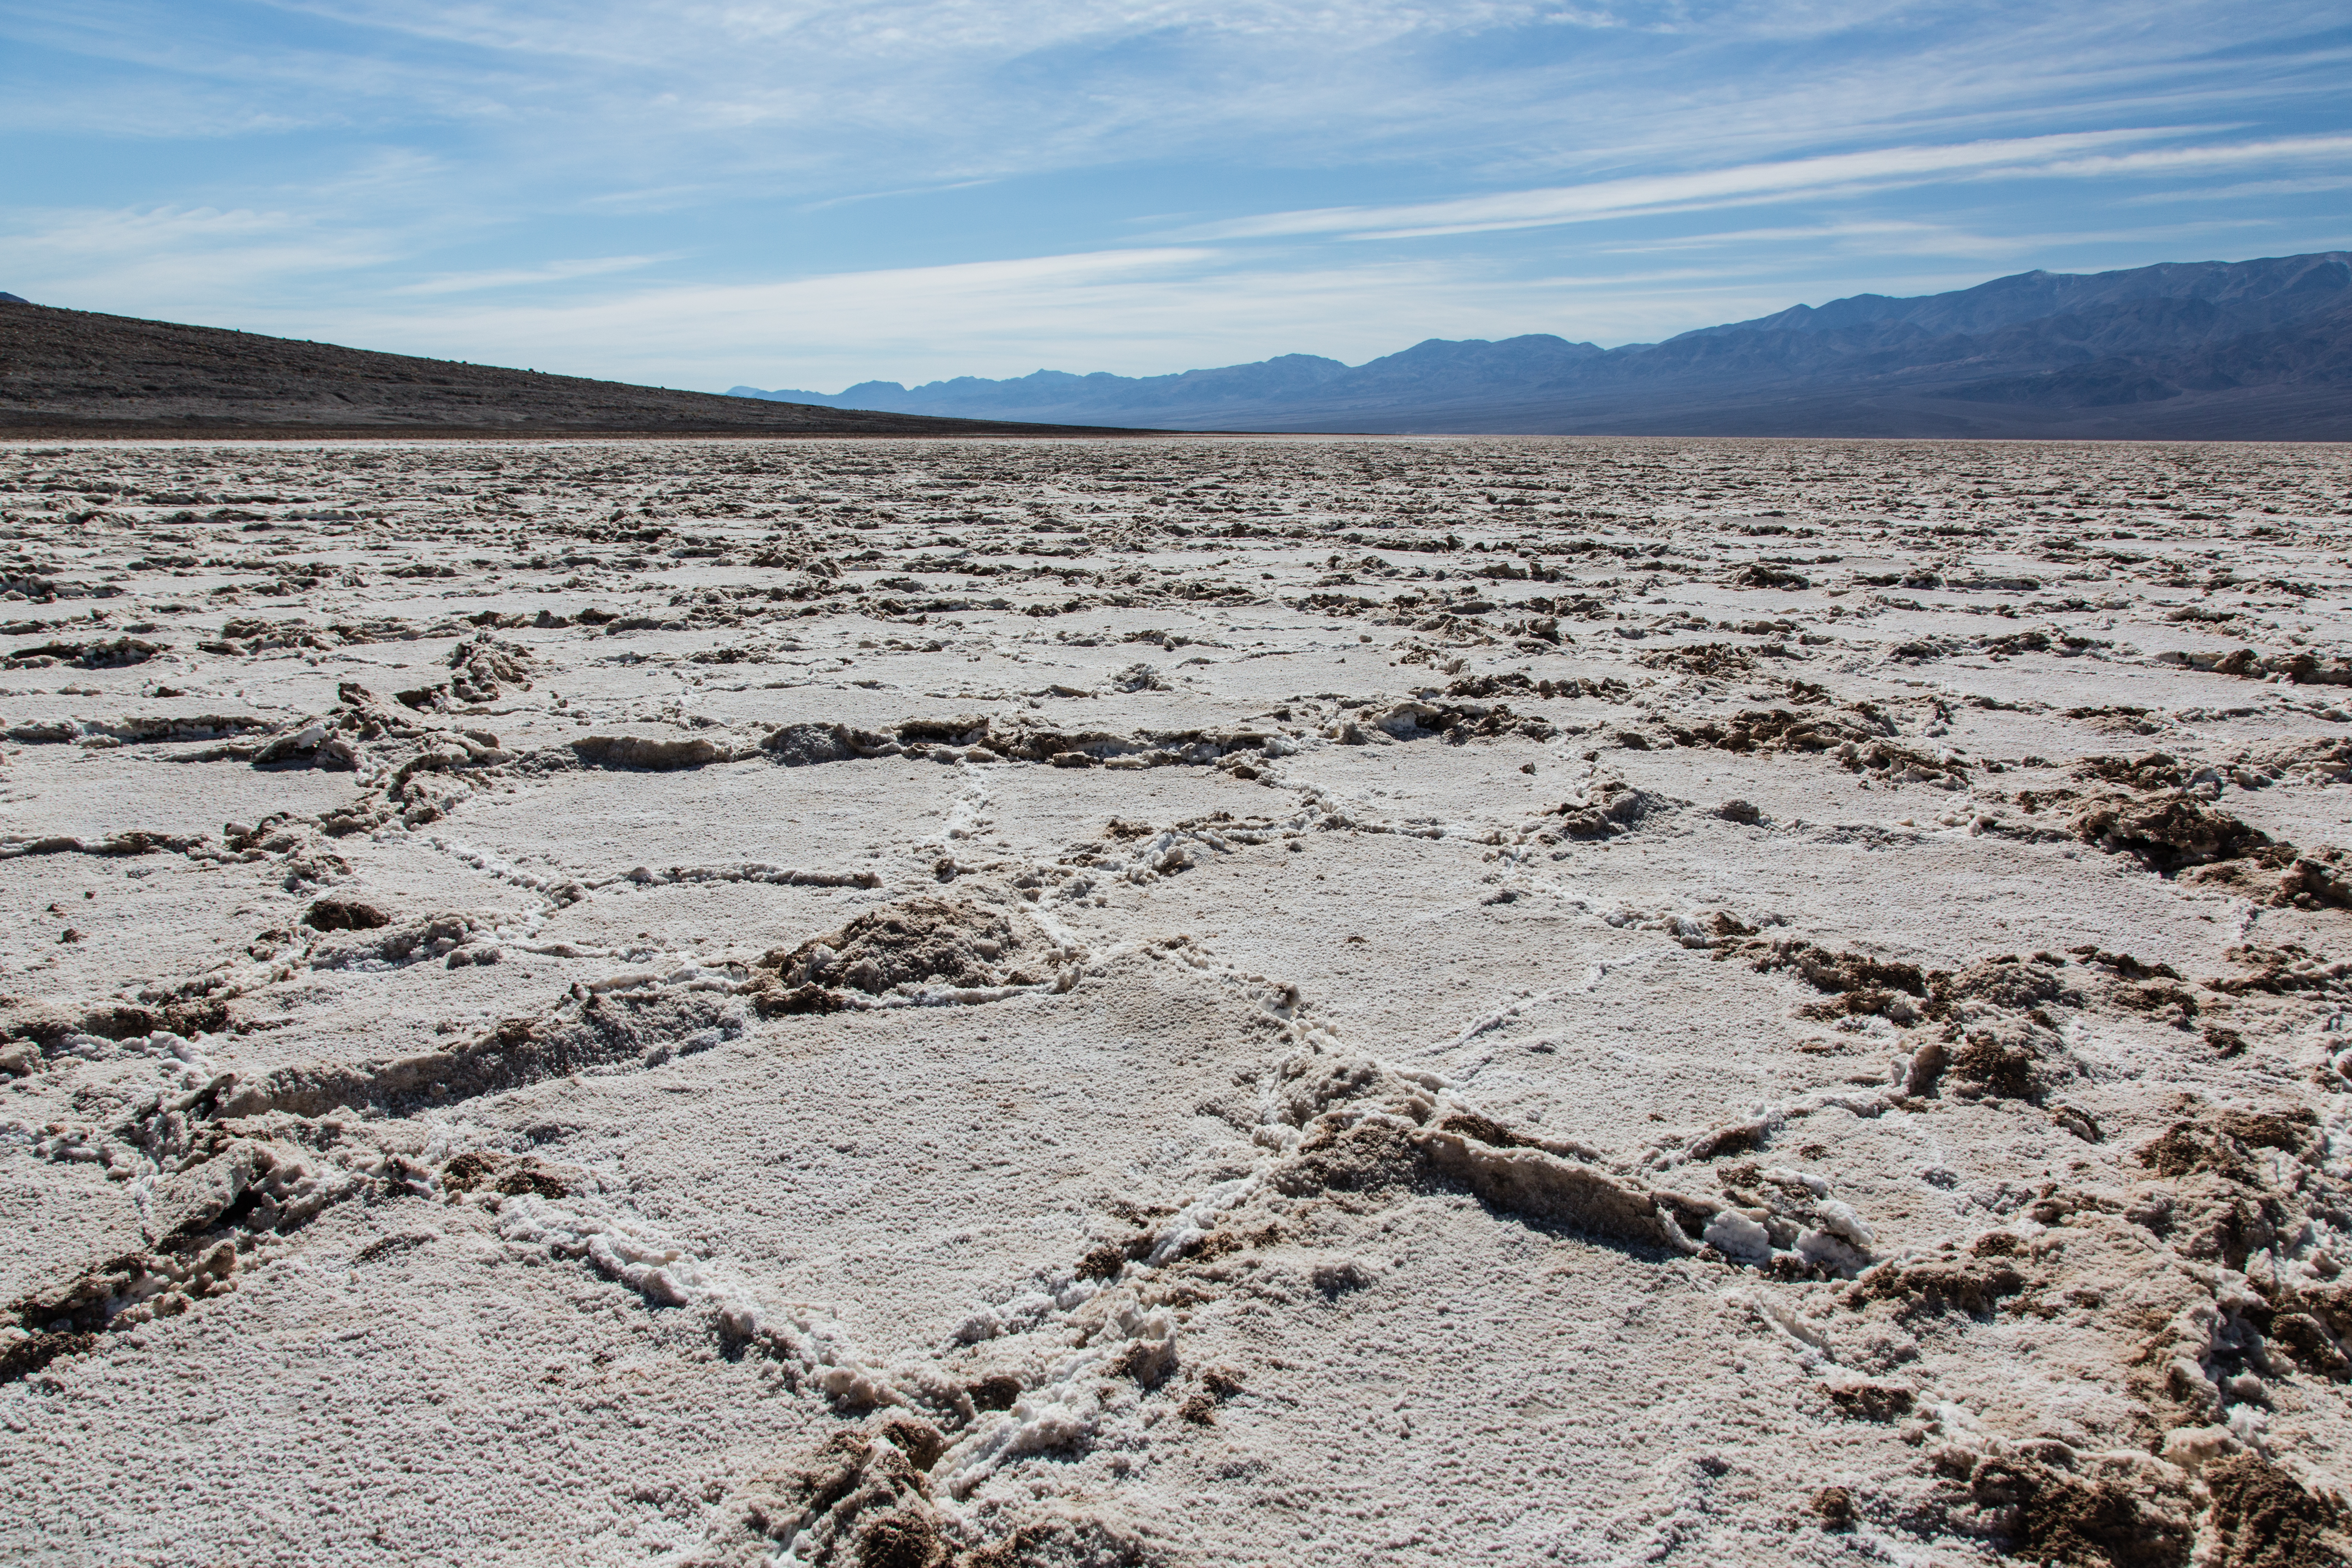 Flat landscape with hexagonal salt formations. Mountains are in the background, but the salt flats appear devoid of multicellular life.